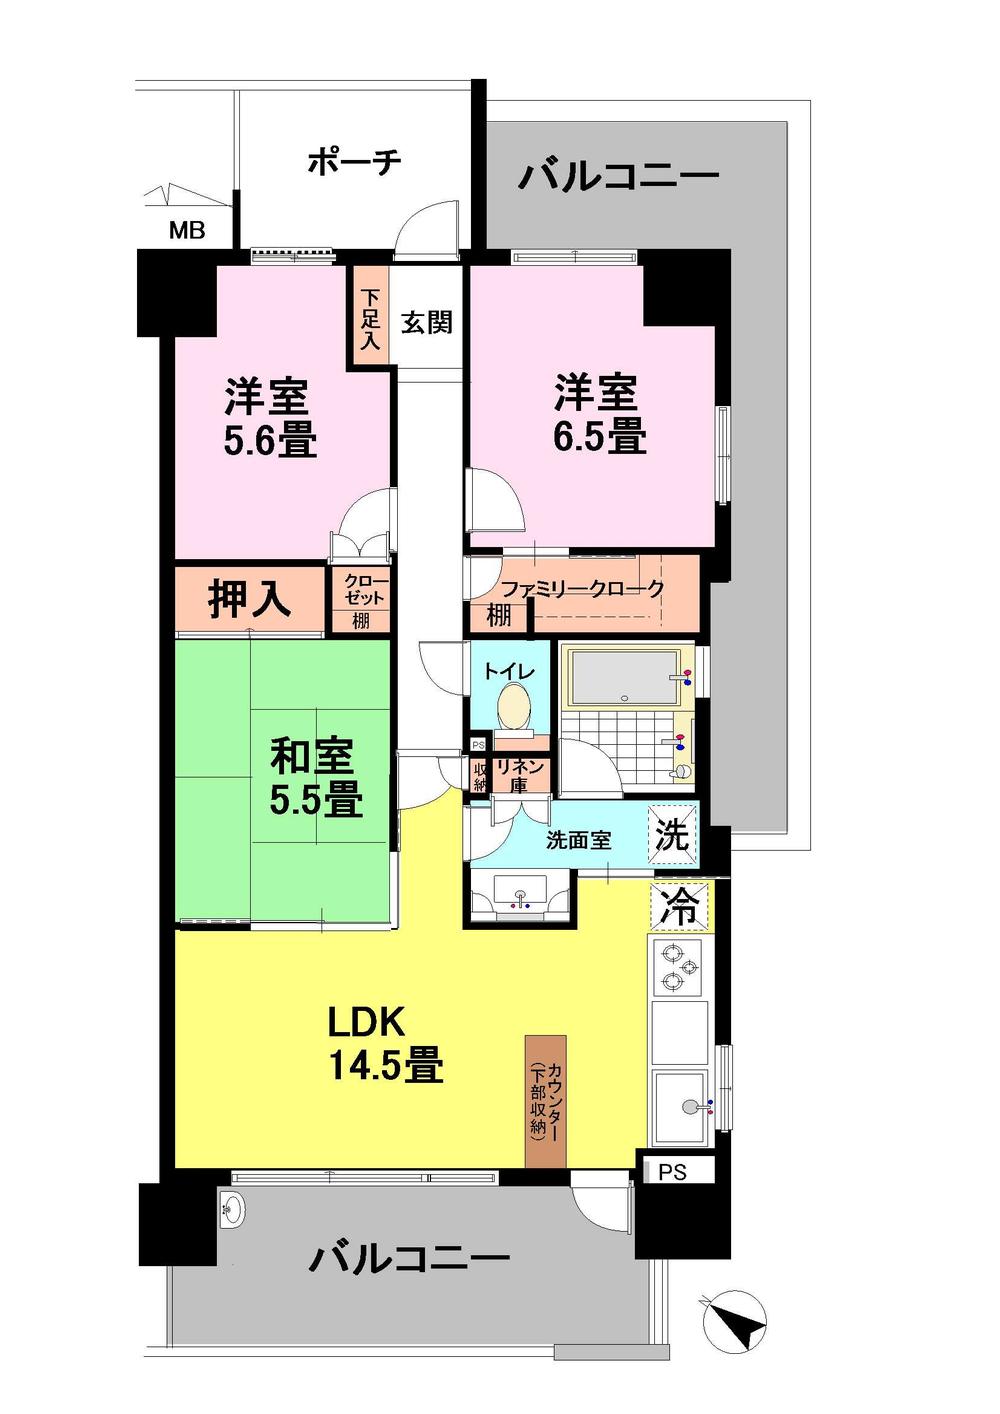 Floor plan. 3LDK, Price 24,800,000 yen, Occupied area 72.73 sq m , Balcony area 26.39 sq m 4 Kaikaku room 2 side balcony of sun per good! There is storage space in all living room!